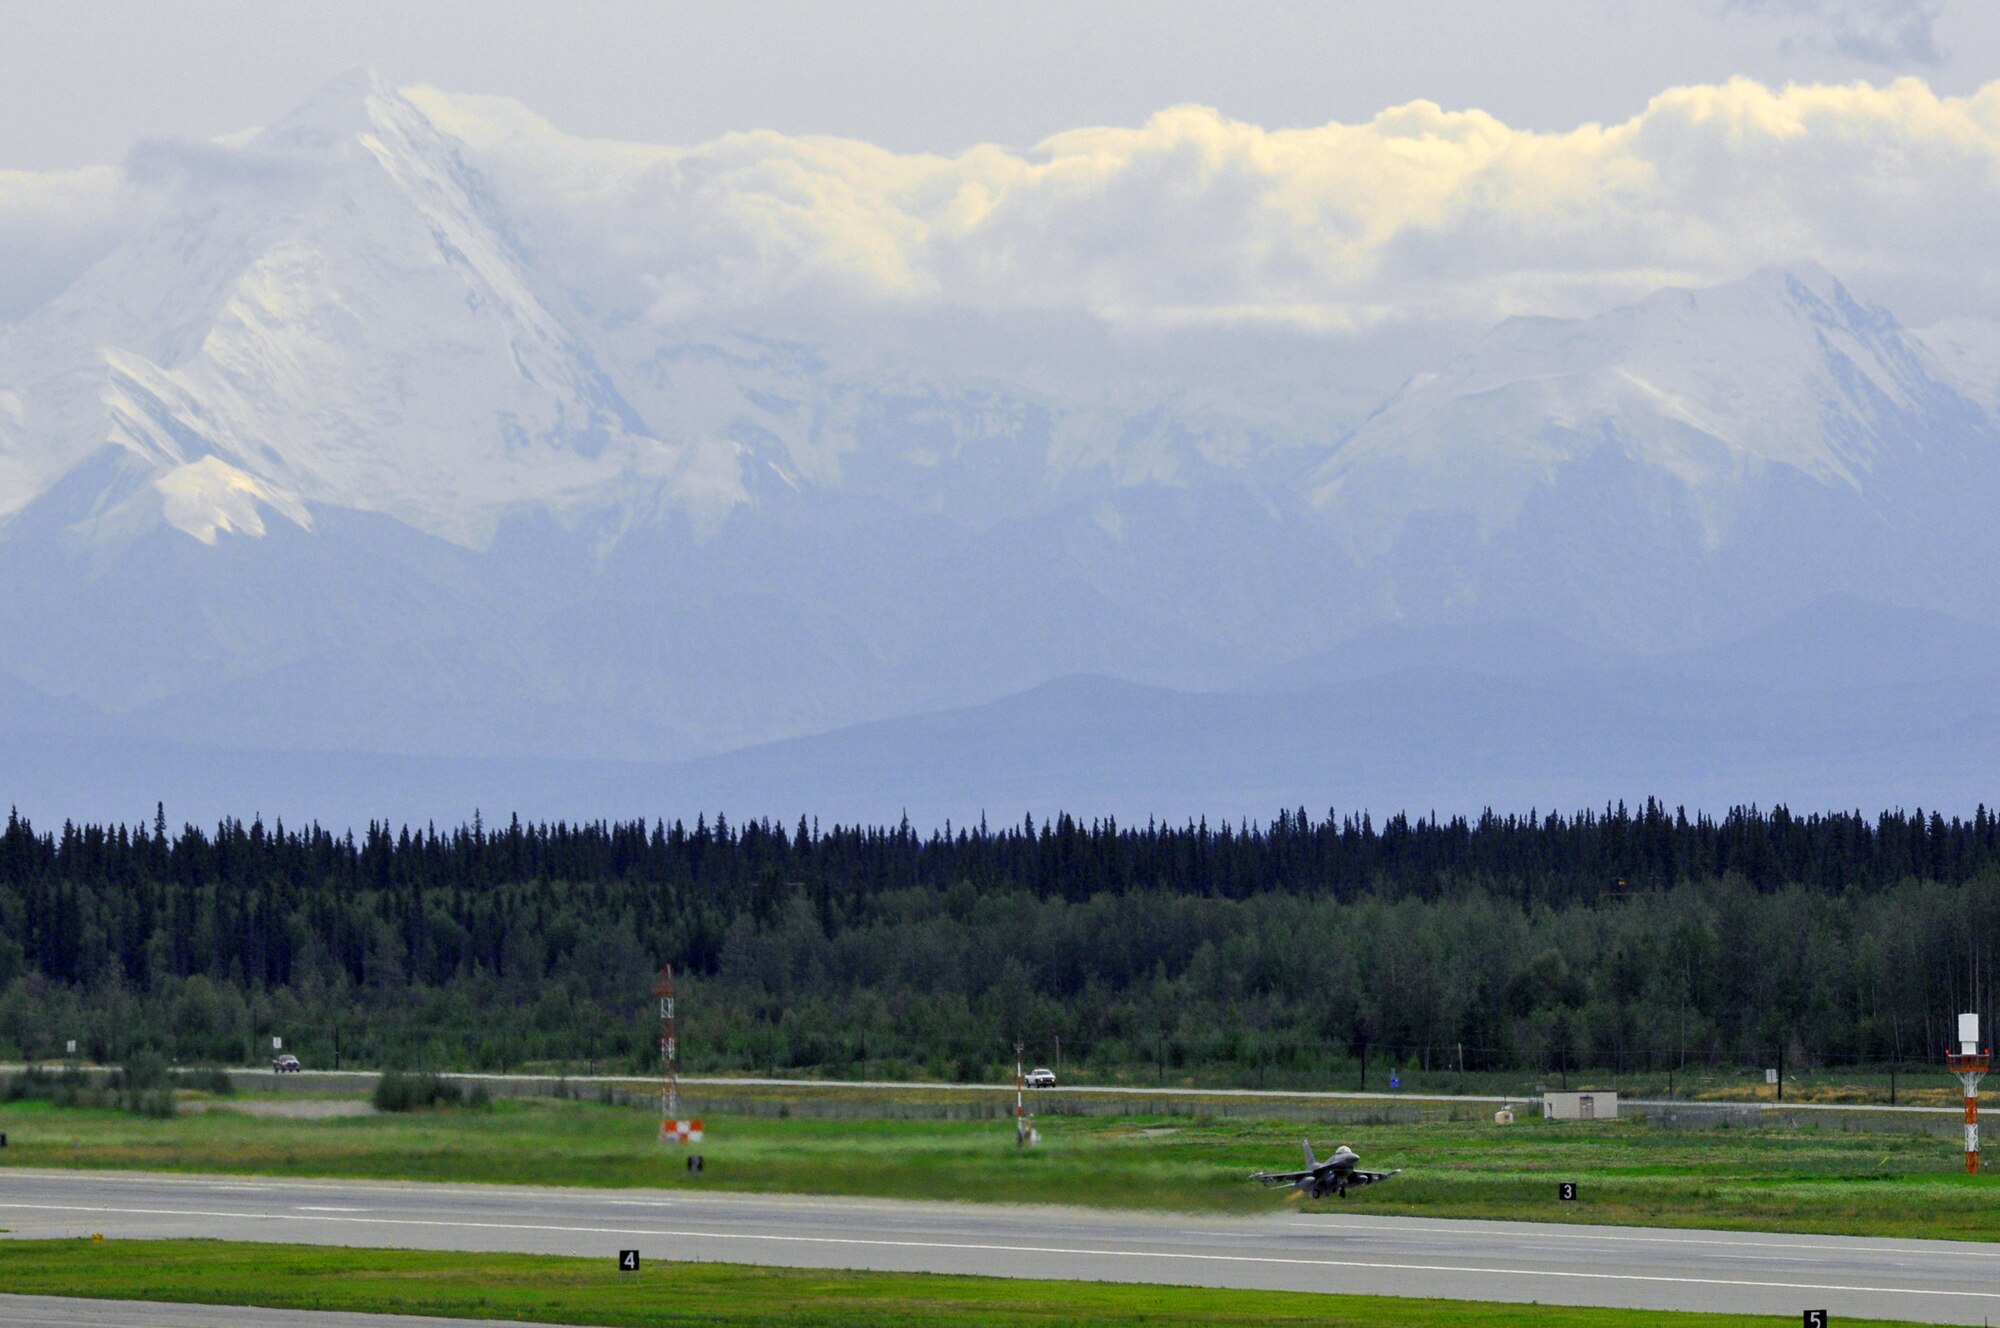 An F-16 Fighting Falcon from the 115th Fighter Wing, takes off from Eielson AFB, Alaska during a Red Flag training exercise Aug. 17. The 115th deployed 10 aircraft and more than 130 Airmen in support of the Red Flag exercise. (Wisconsin Air National Guard photo by Tech Sgt. Ashley Bell)